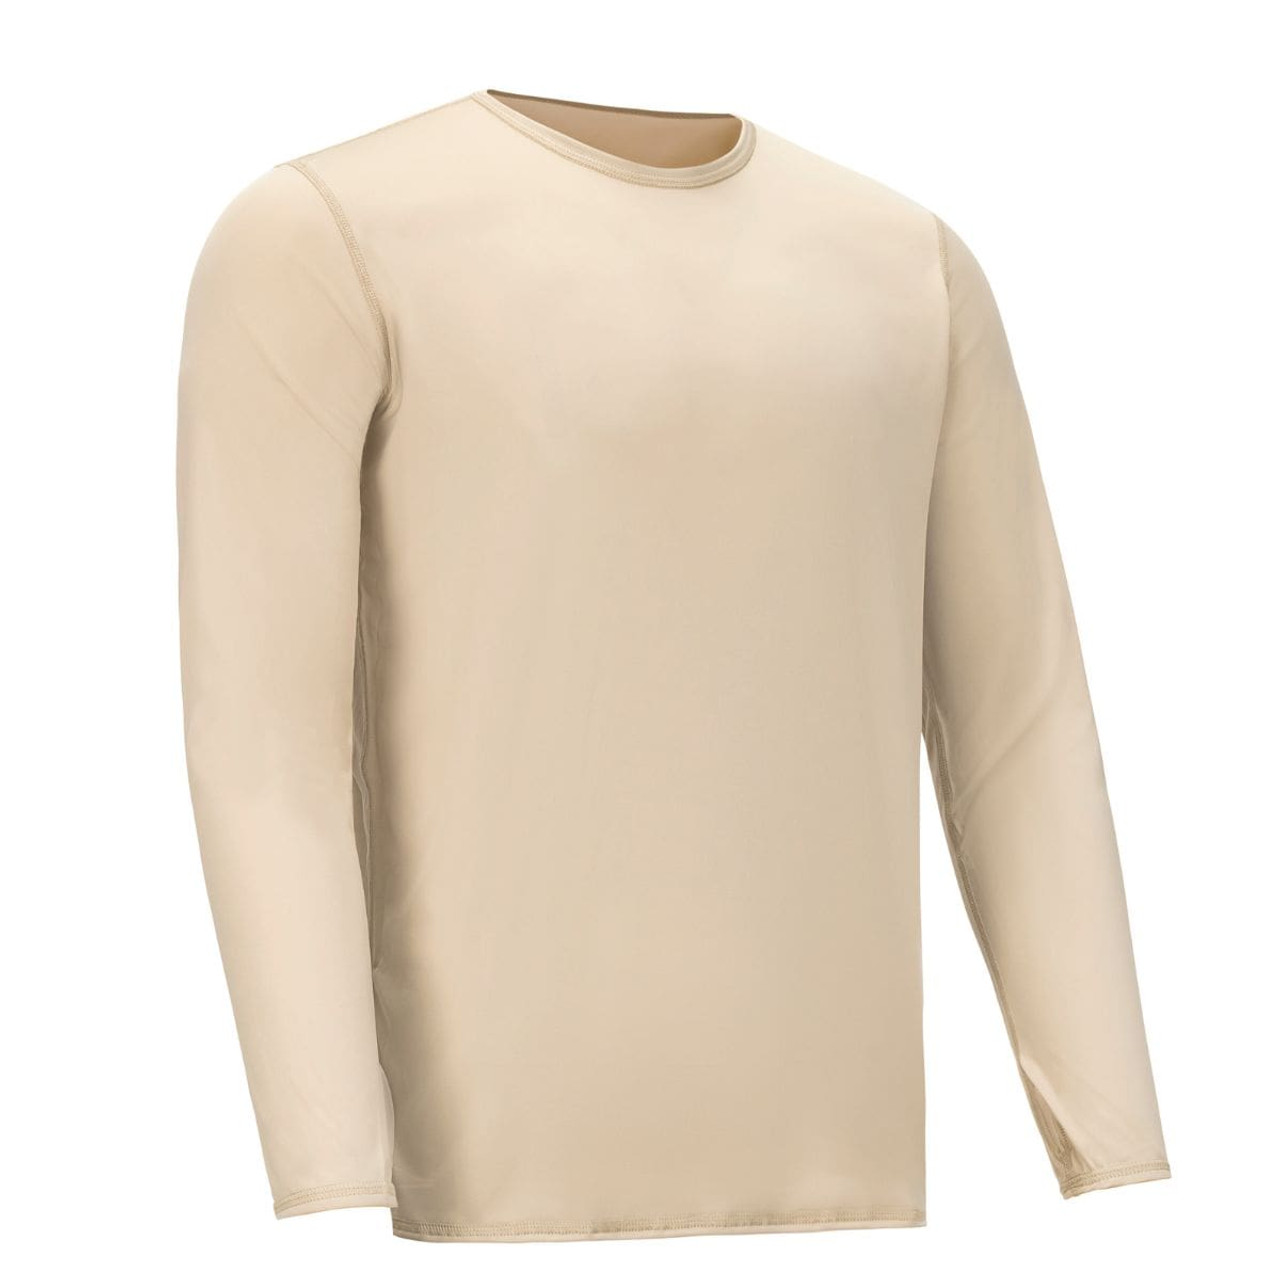 Polartec U.S. Issue Level 1 Silk Weight Thermal Top, ECWCS